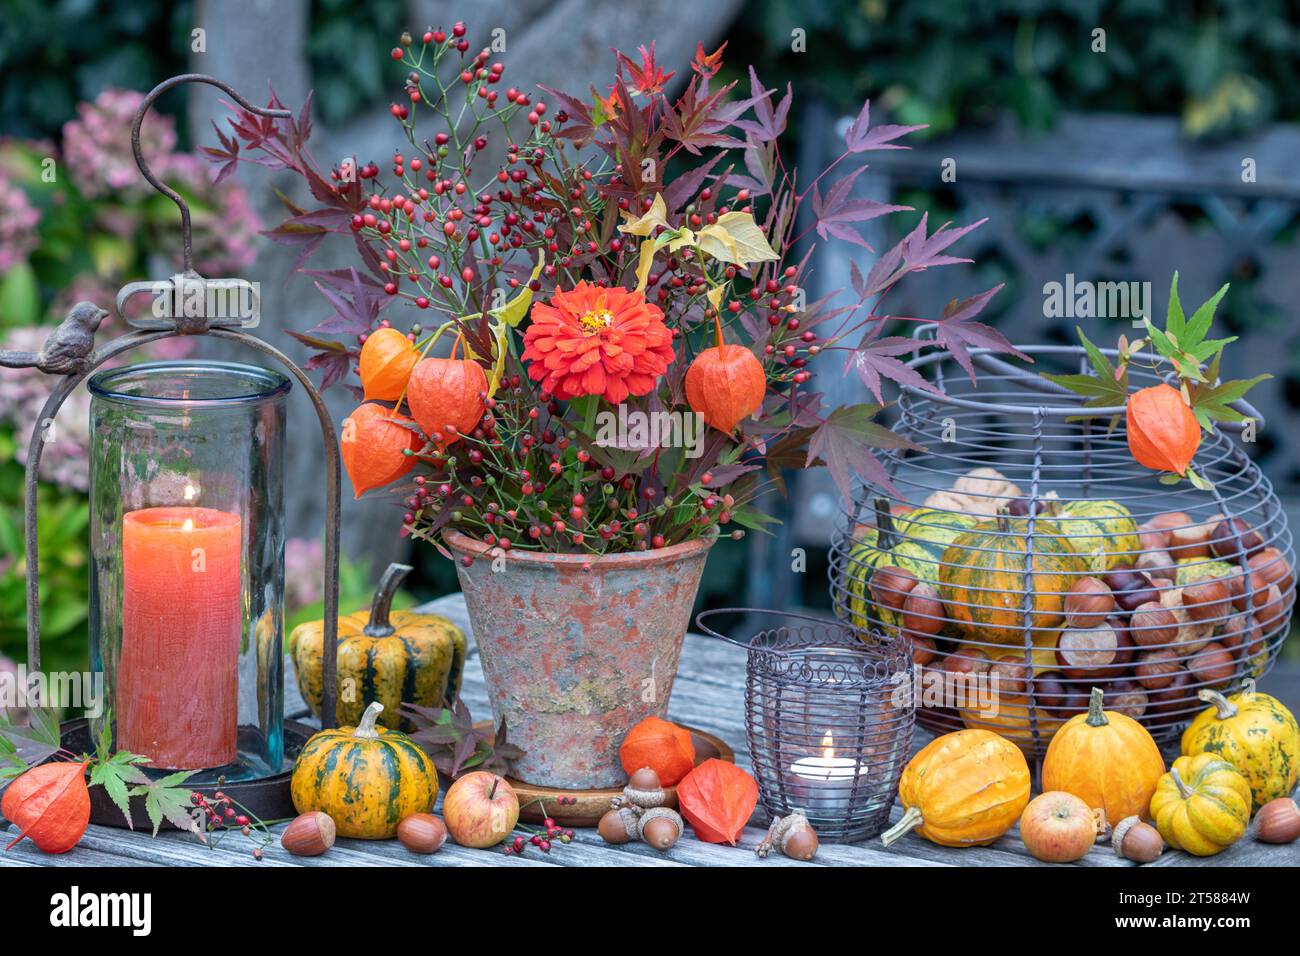 autumn arrangement with bouquet of orange zinnia, physalis, rose hips and maple leaves, pumpkins and lantern Stock Photo